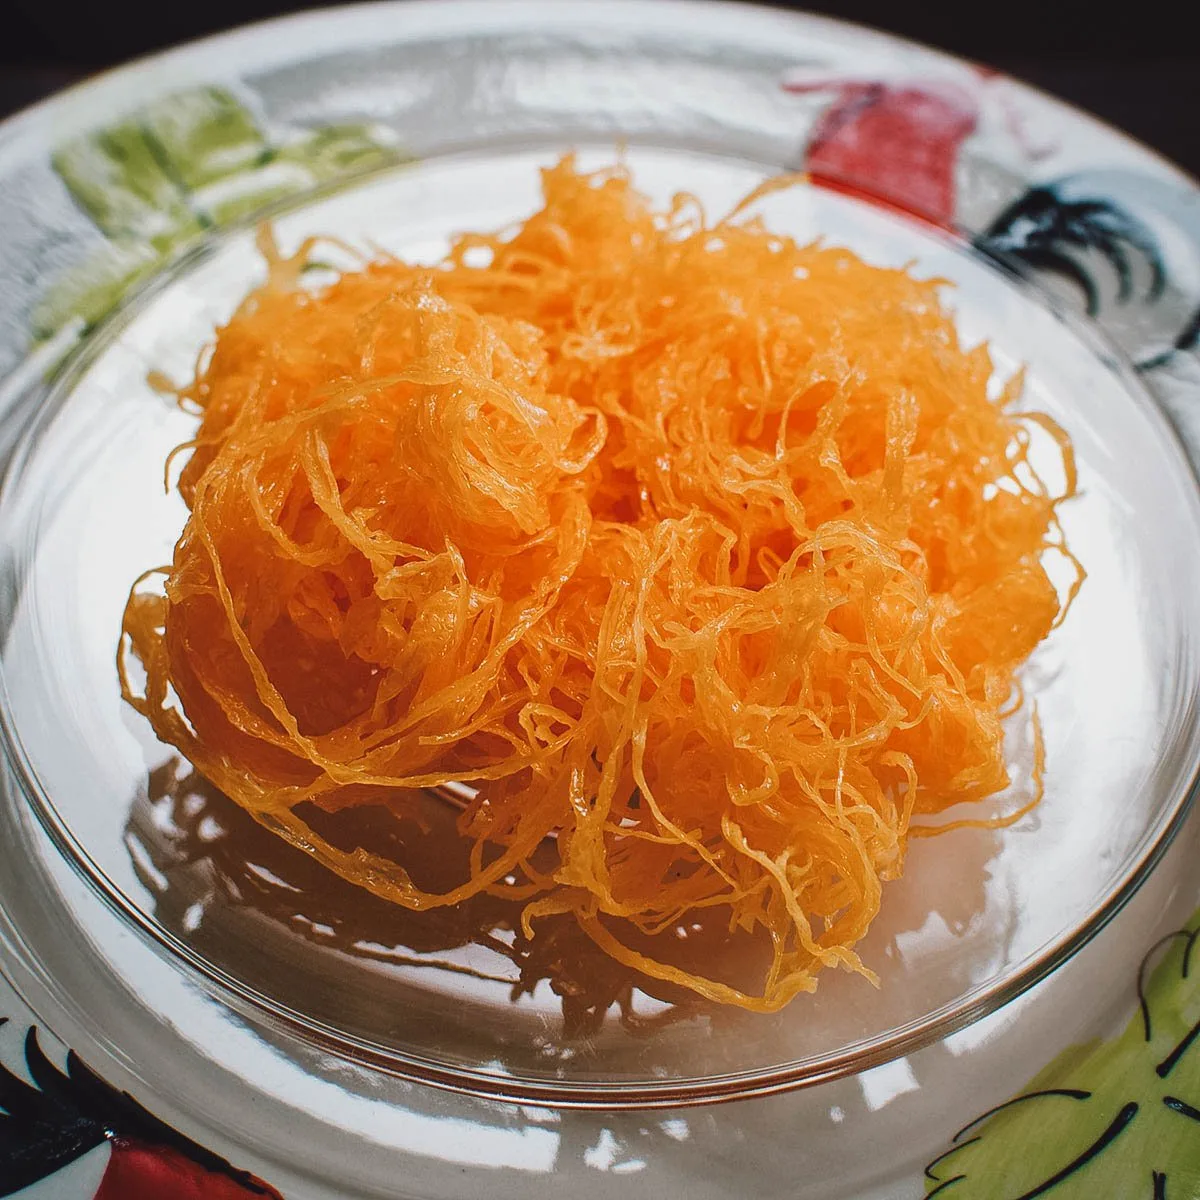 Fios de ovos, a Brazilian sweet treat made with egg yolk strands boiled in sugar syrup